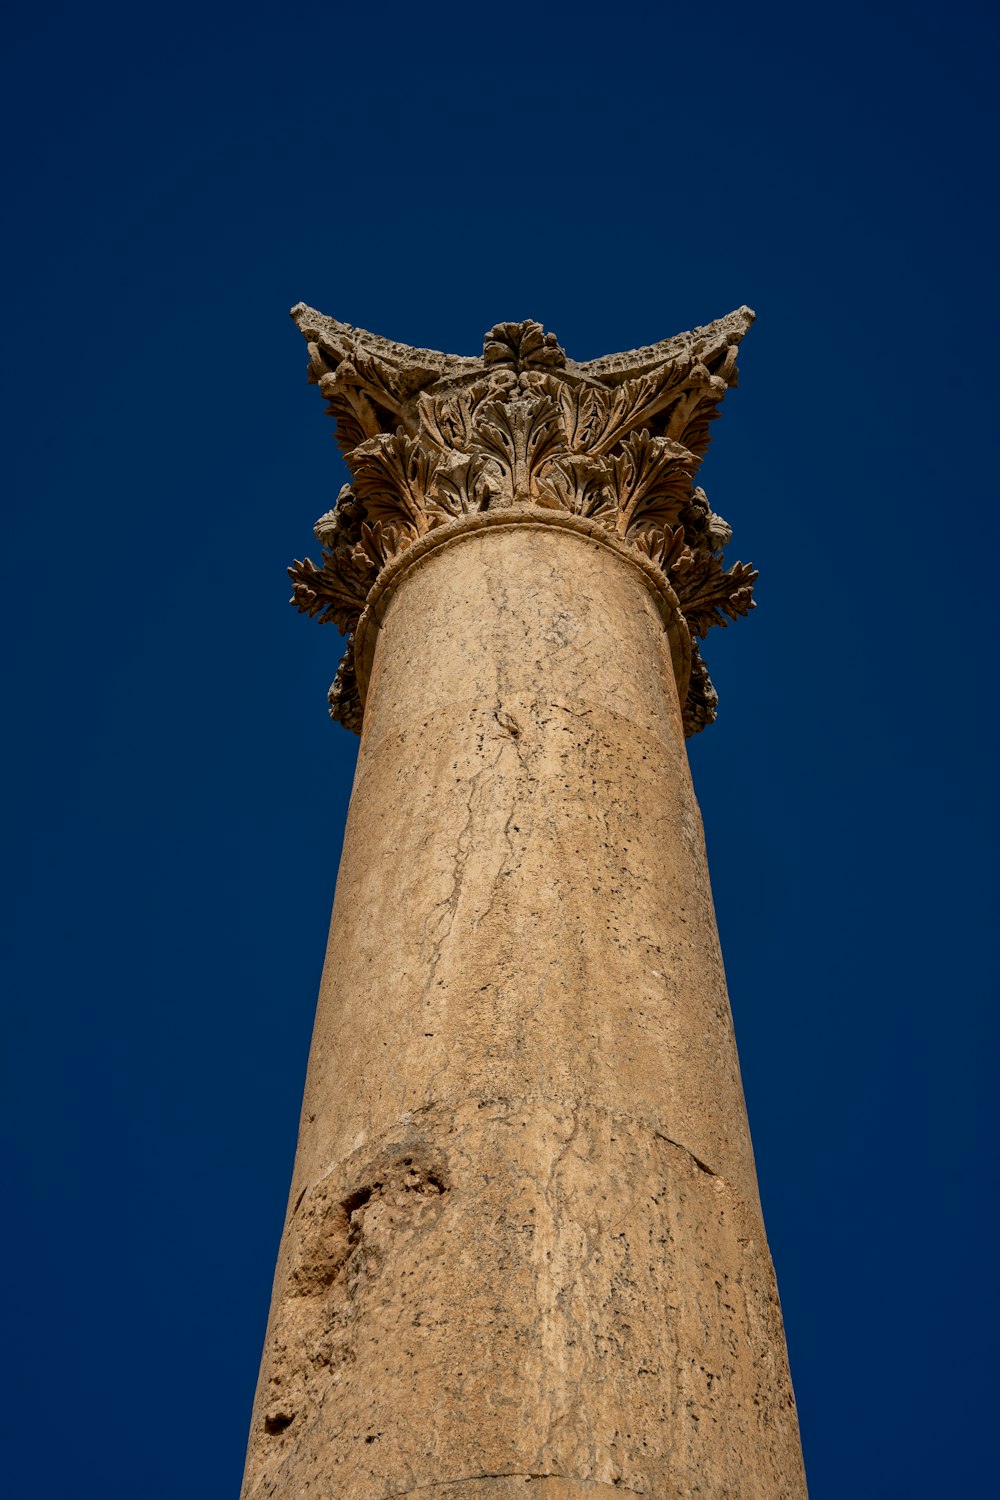 the top of a tall pillar with a statue on top of it